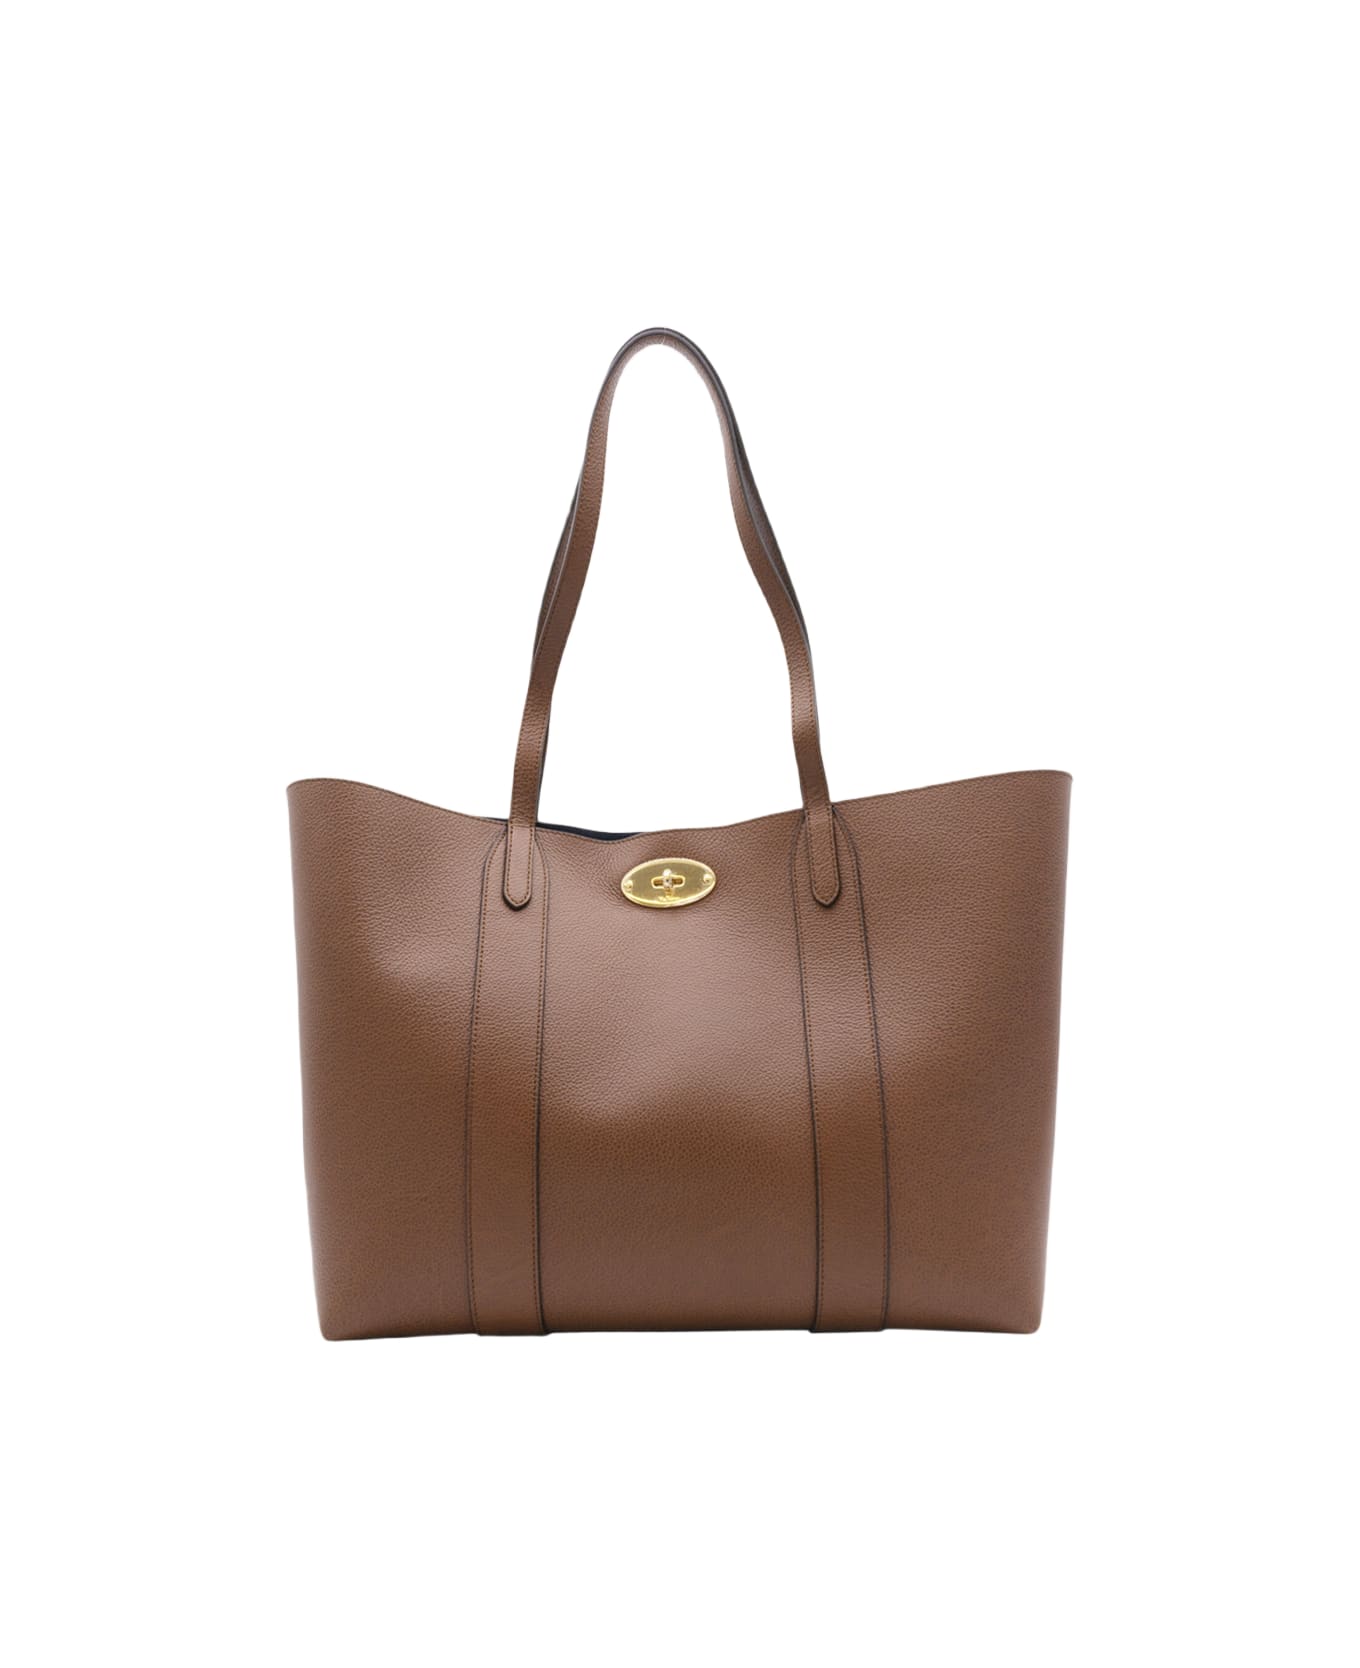 Mulberry Brown Leather Tote Bag - OAK